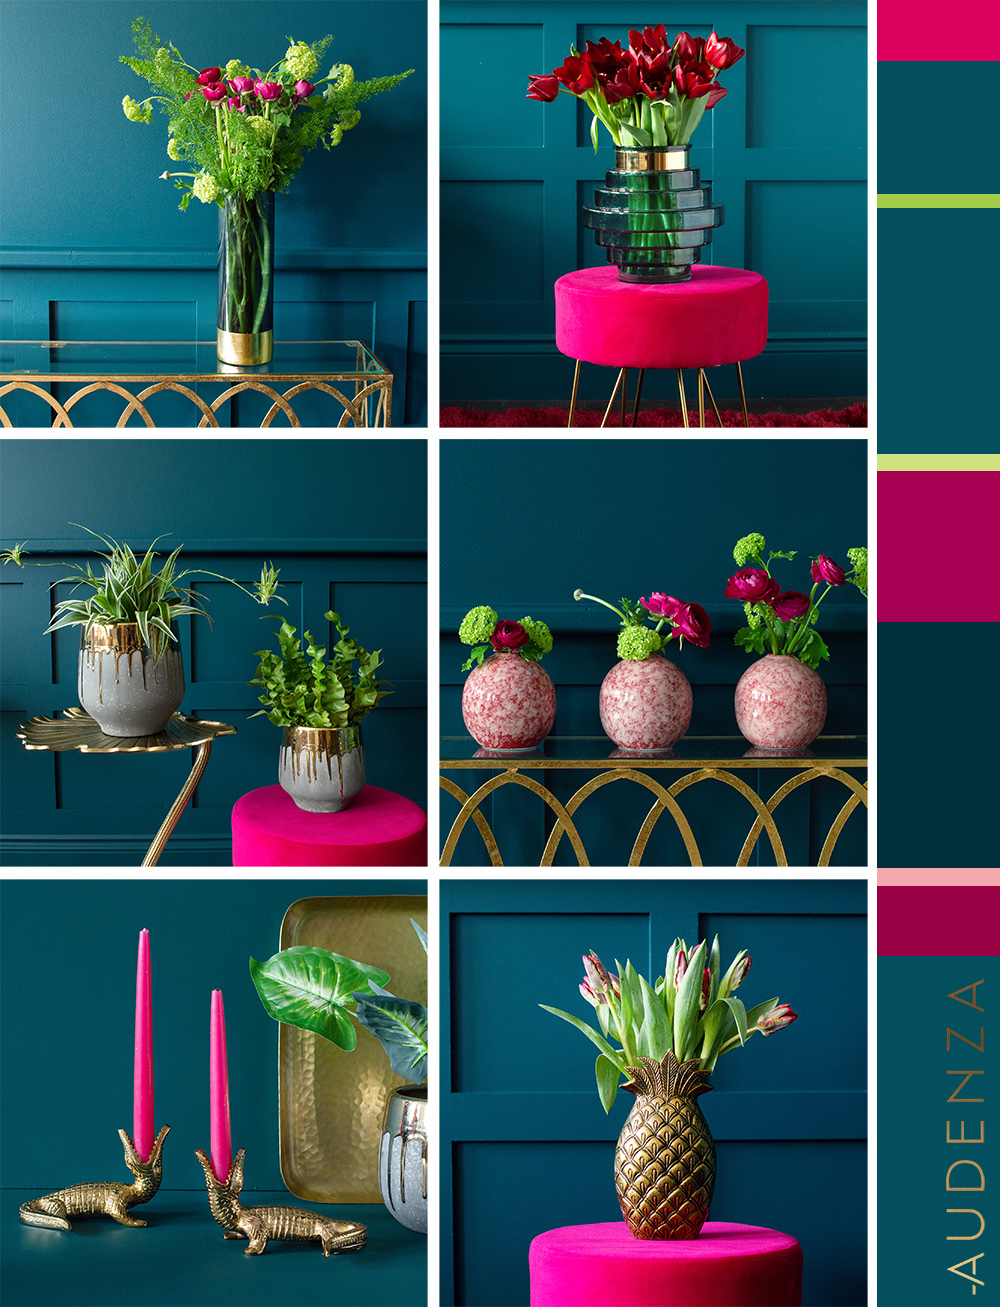 Hot pink and teal colour palette inspiration. Colour scheme ideas for your home.